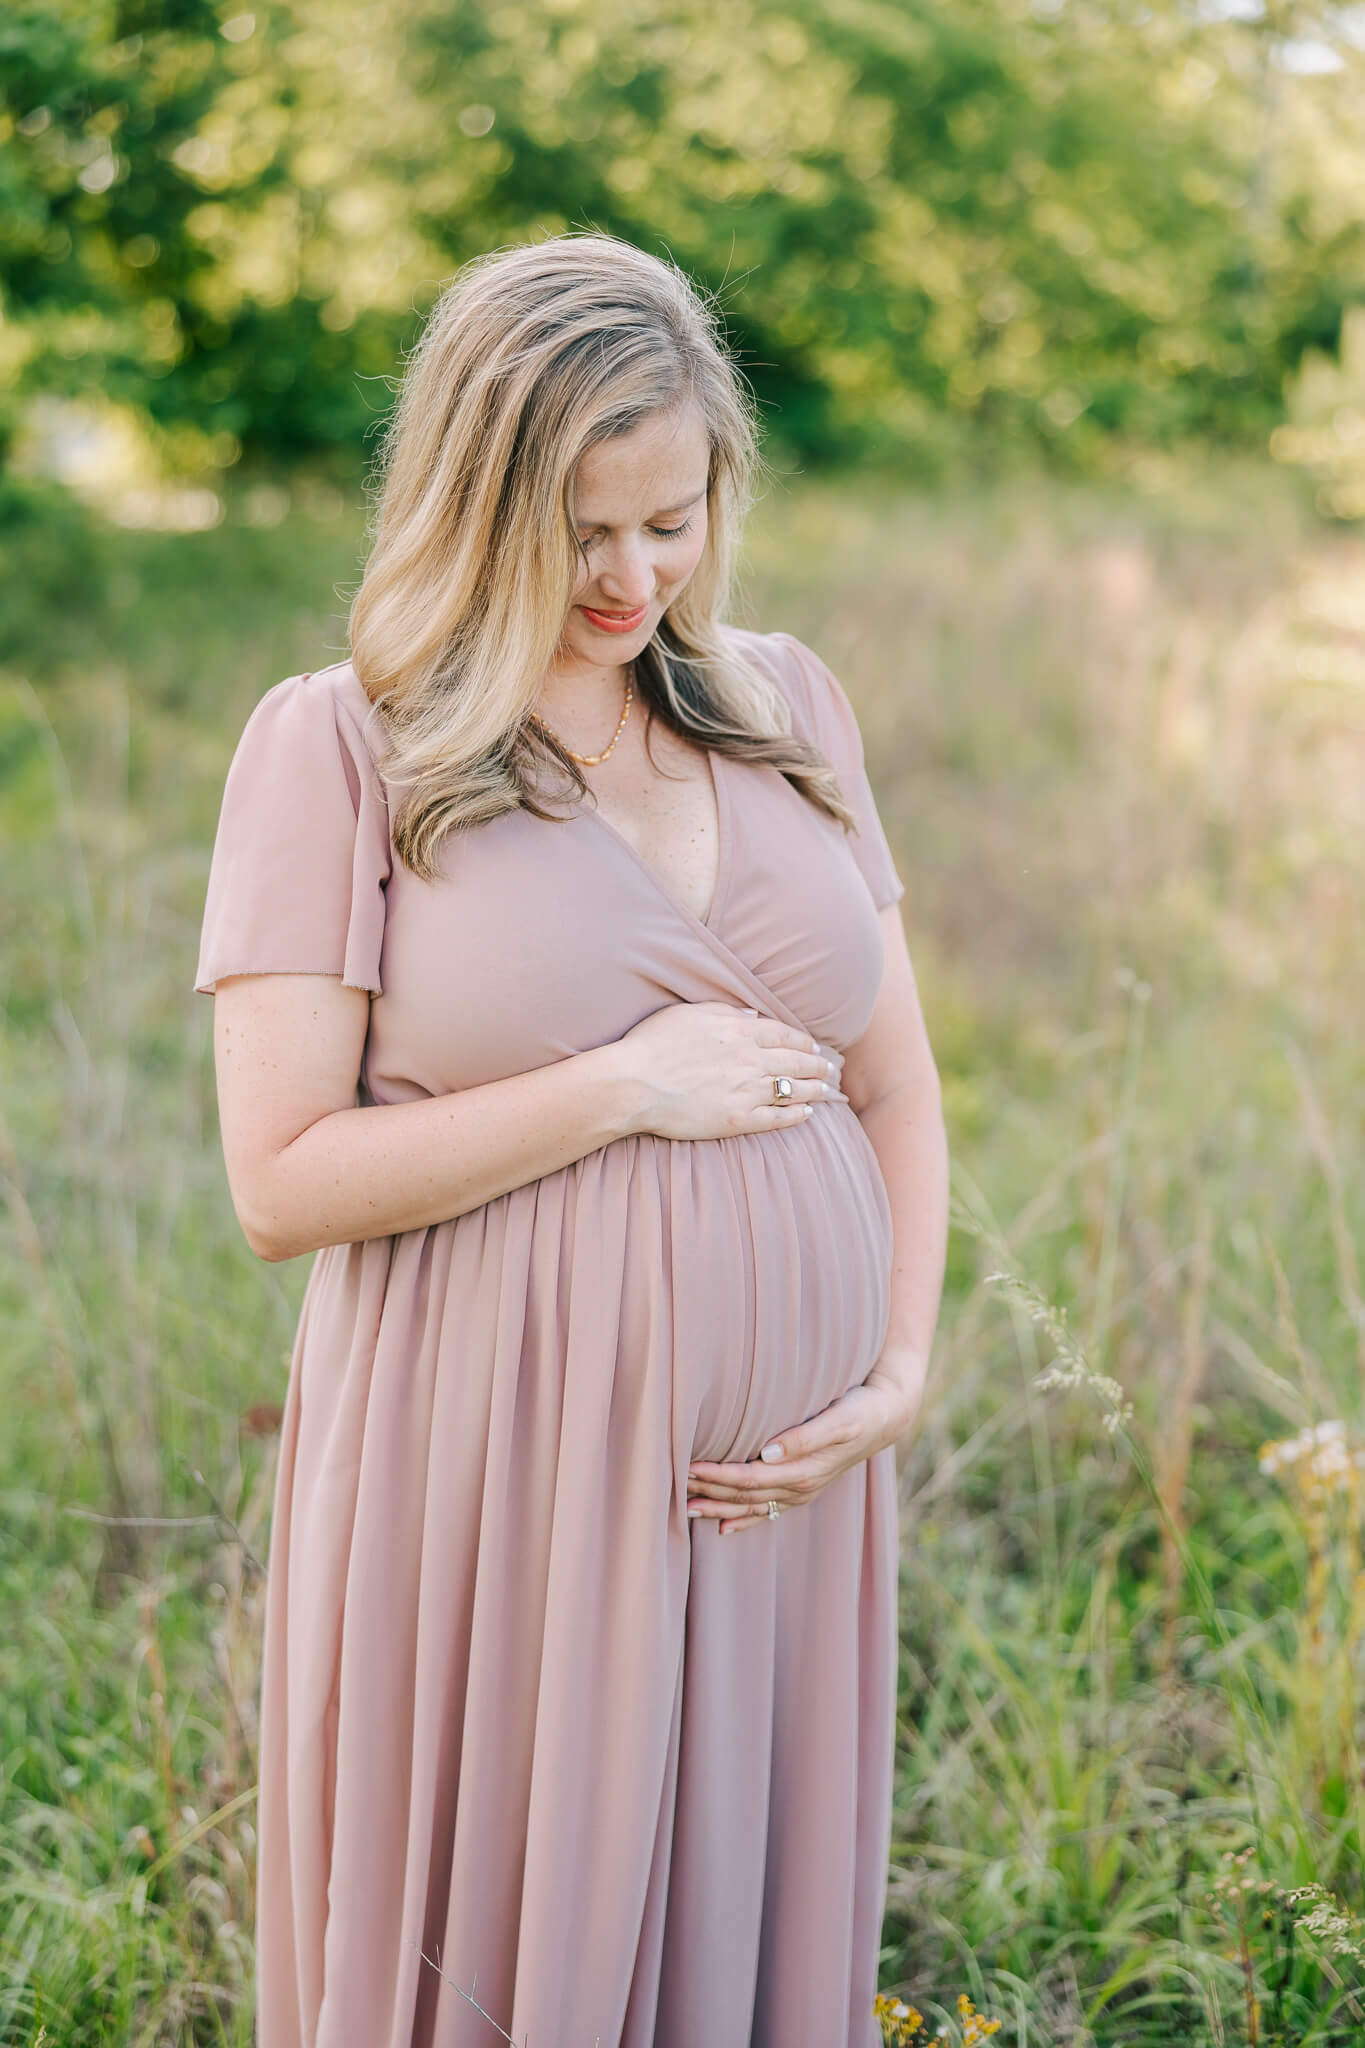 Expecting mom holding her baby belly during her columbia sc maternity session. Mom is using a Midwives Columbia SC for her birth.